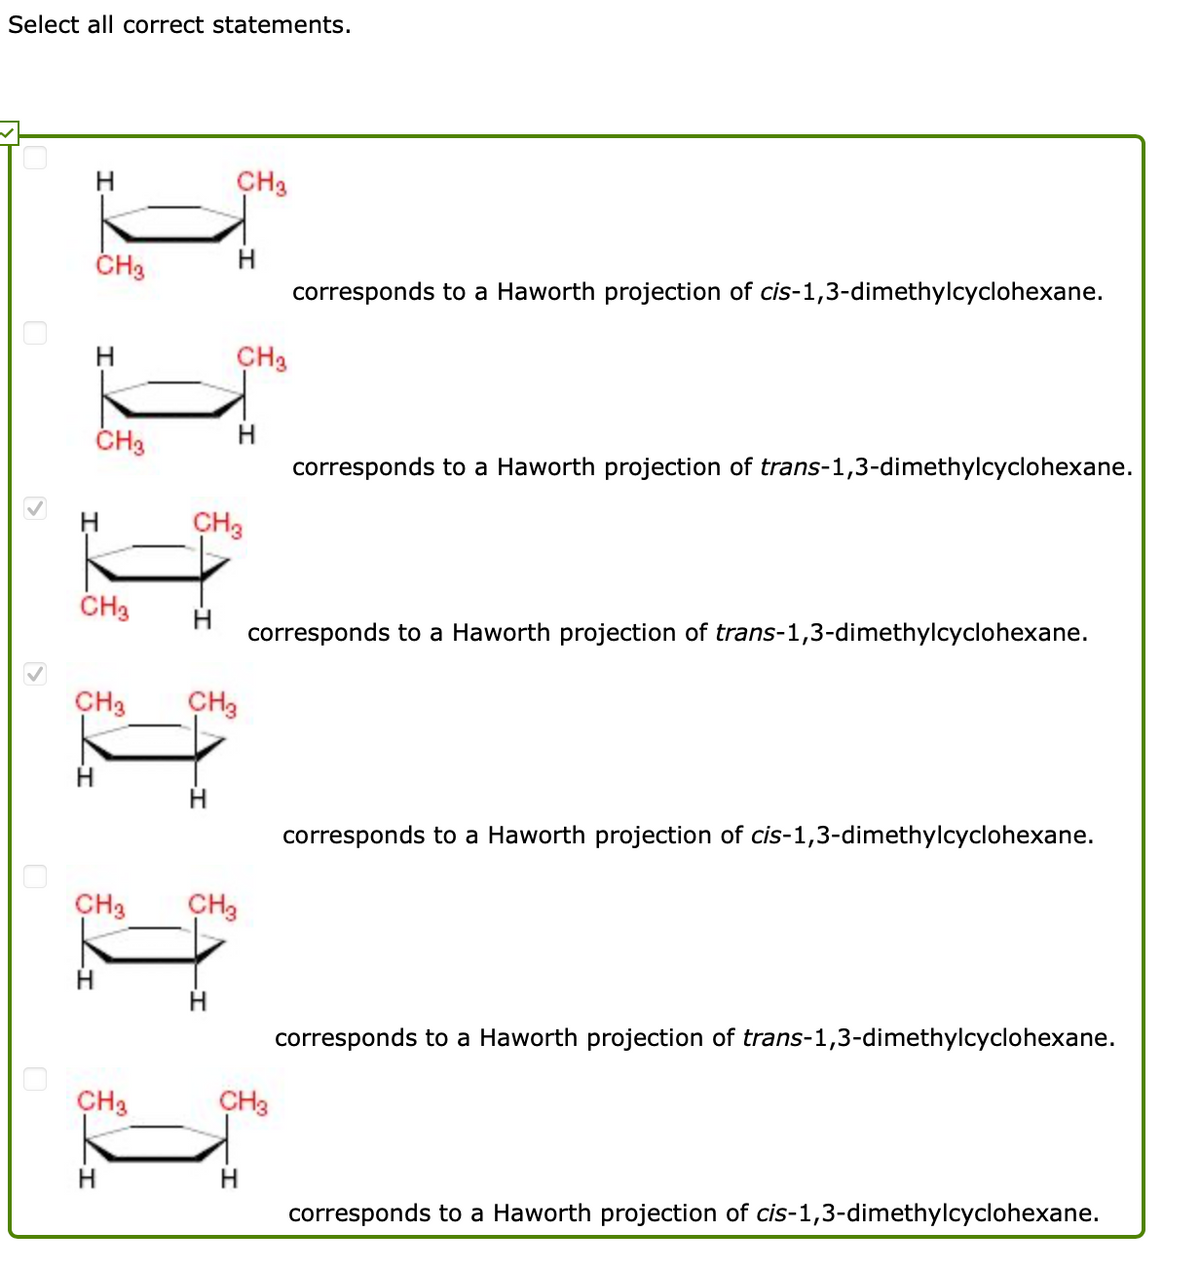 Select all correct statements.
H
CH3
CH3
H
corresponds to a Haworth projection of cis-1,3-dimethylcyclohexane.
H
CH3
ČH3
H
corresponds to a Haworth projection of trans-1,3-dimethylcyclohexane.
CH3
CH3
corresponds to a Haworth projection of trans-1,3-dimethylcyclohexane.
CH3
CH3
corresponds to a Haworth projection of cis-1,3-dimethylcyclohexane.
CH3
CH3
corresponds to a Haworth projection of trans-1,3-dimethylcyclohexane.
CH3
CH3
corresponds to a Haworth projection of cis-1,3-dimethylcyclohexane.
